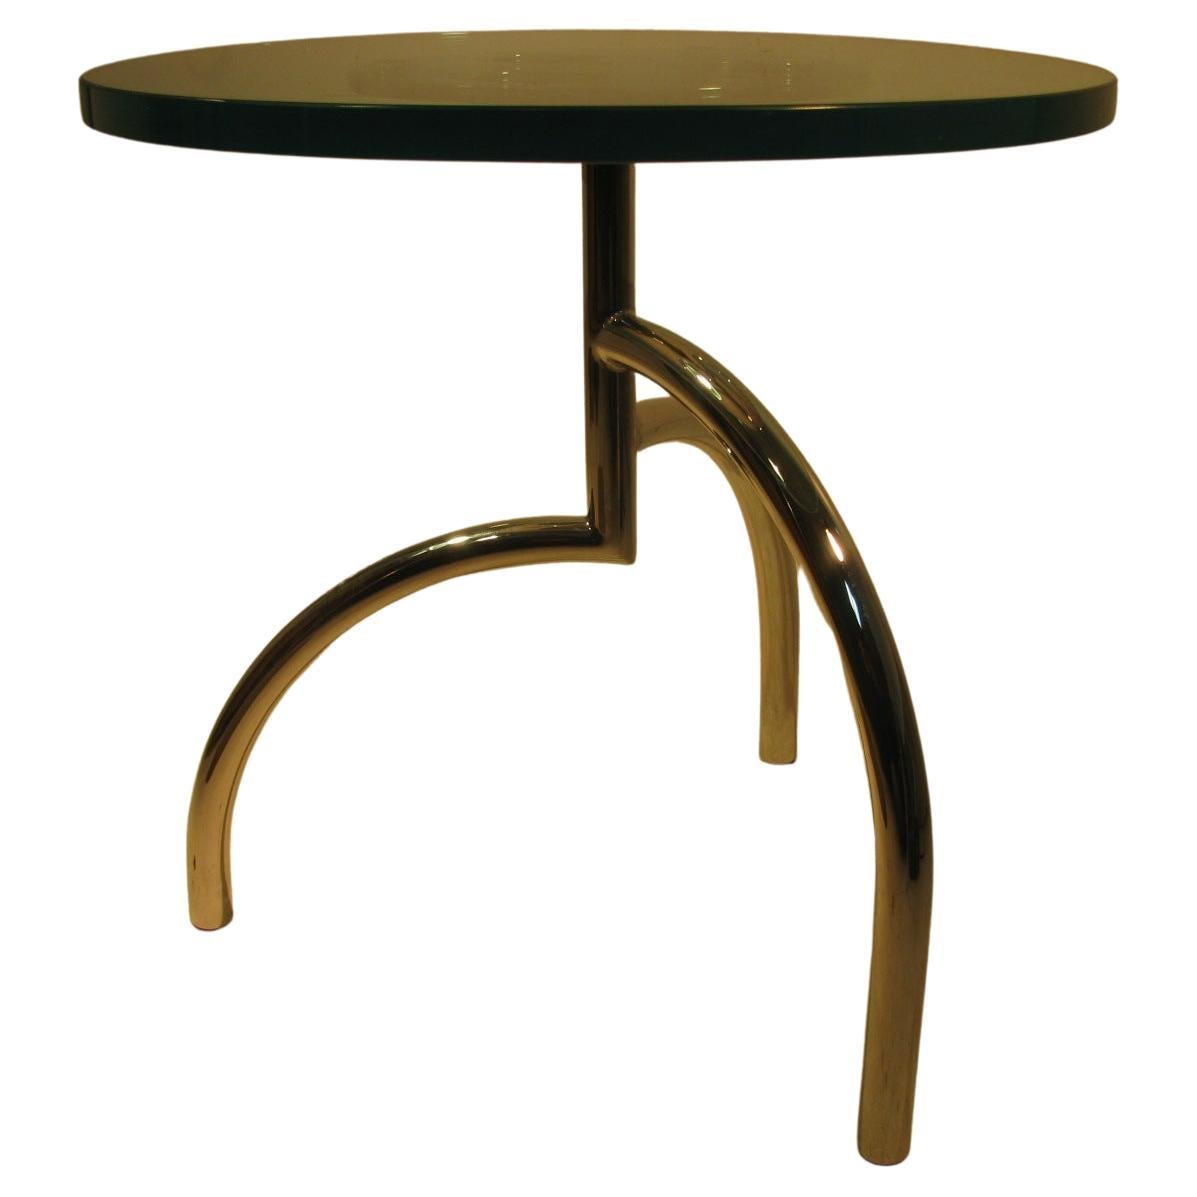 Fabulous drinks stand, side table by Stanley Jay Friedman for Brueton. Spyder table is in the Minimalist category for its pared down design. Glass top lifts off. High Quality Table in excellent vintage condition with minimal wear.